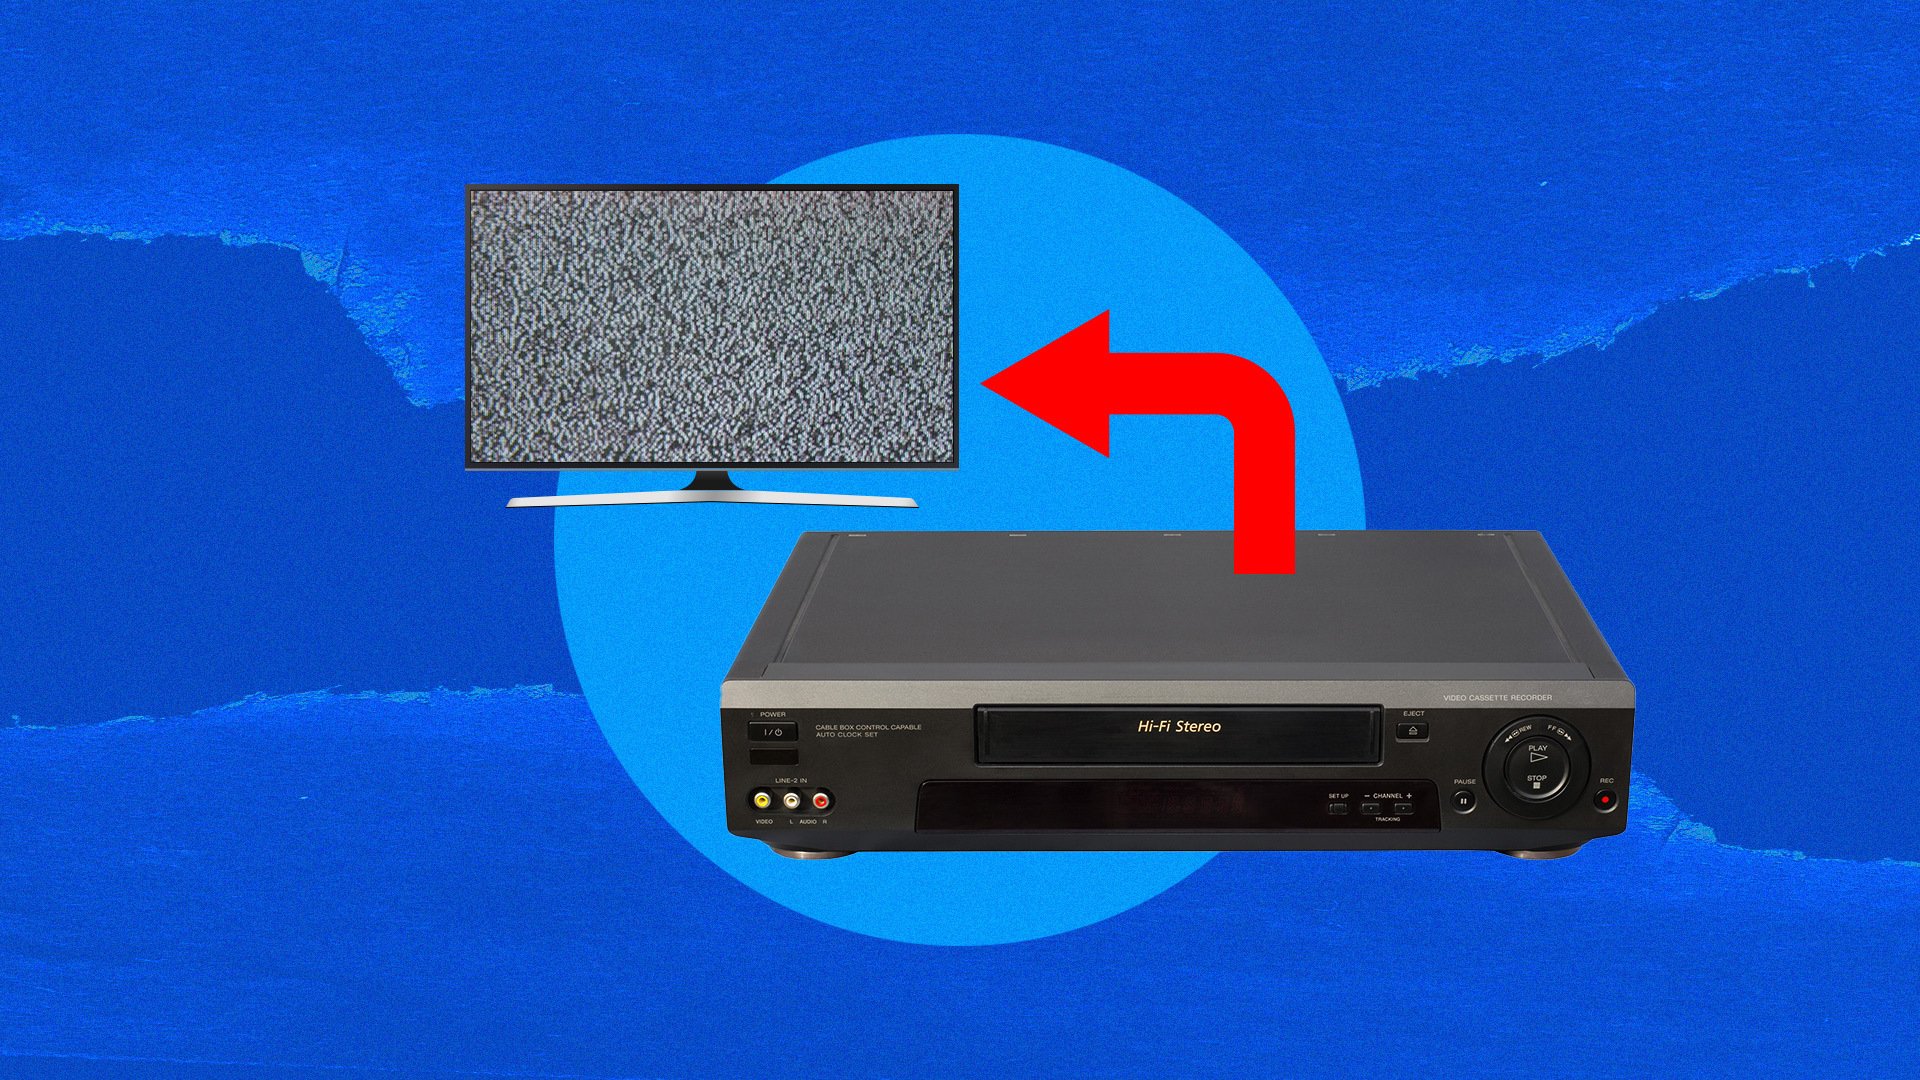 How to Connect a VCR to Your Modern TV